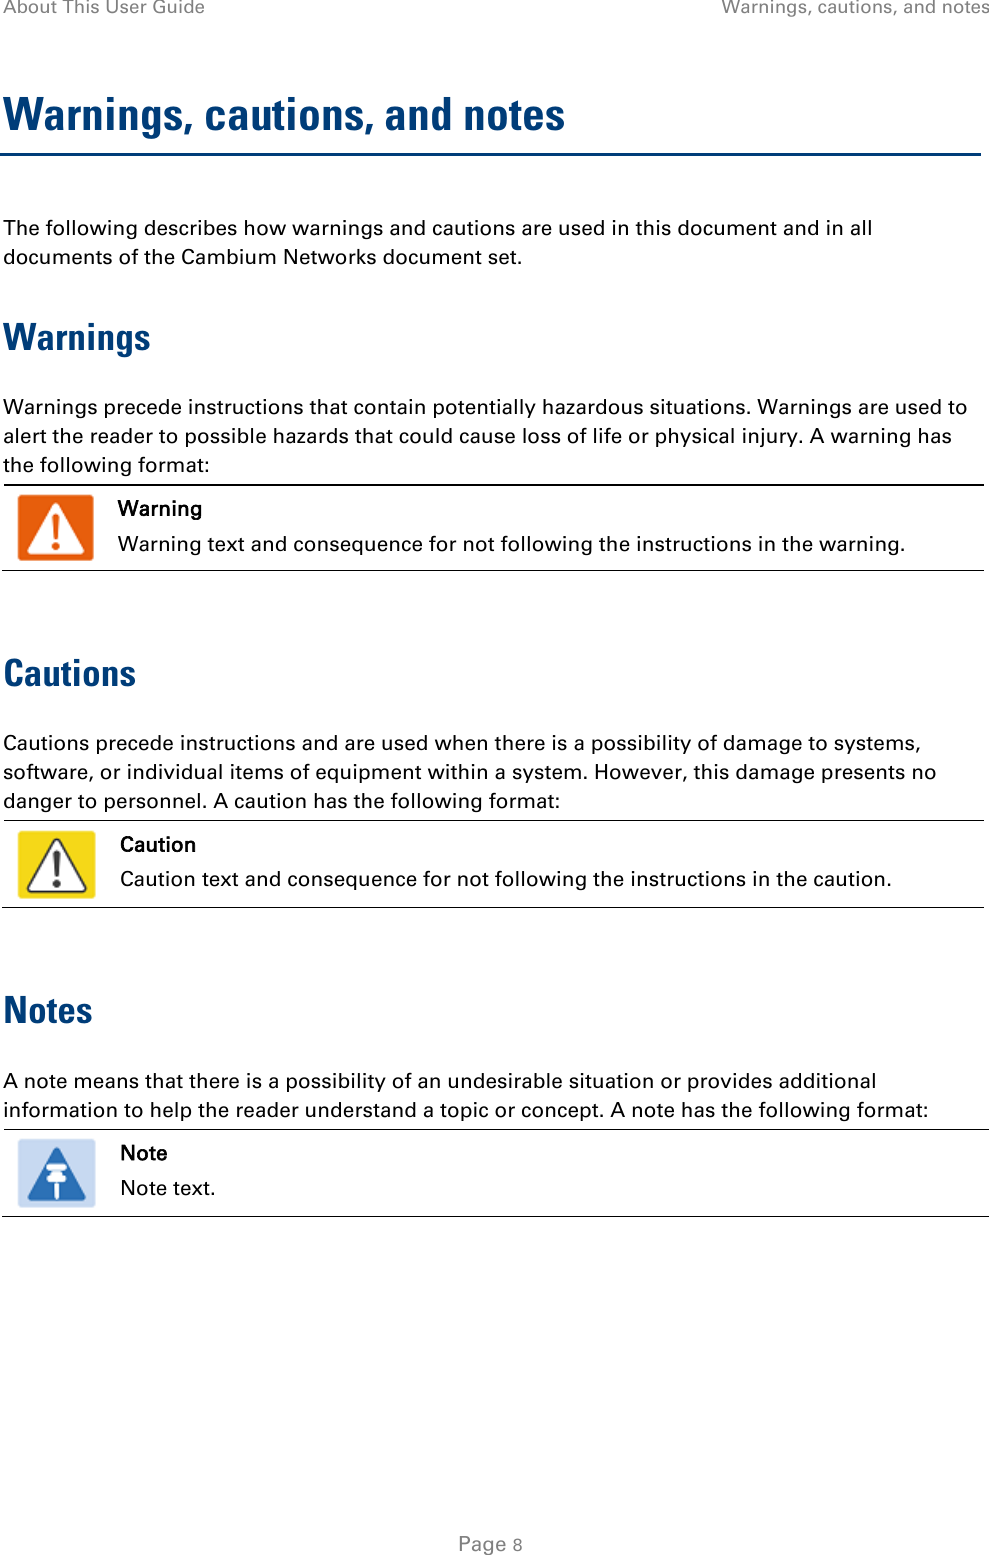 About This User Guide Warnings, cautions, and notes  Warnings, cautions, and notes The following describes how warnings and cautions are used in this document and in all documents of the Cambium Networks document set. Warnings Warnings precede instructions that contain potentially hazardous situations. Warnings are used to alert the reader to possible hazards that could cause loss of life or physical injury. A warning has the following format:   Warning Warning text and consequence for not following the instructions in the warning.  Cautions Cautions precede instructions and are used when there is a possibility of damage to systems, software, or individual items of equipment within a system. However, this damage presents no danger to personnel. A caution has the following format:   Caution Caution text and consequence for not following the instructions in the caution.  Notes A note means that there is a possibility of an undesirable situation or provides additional information to help the reader understand a topic or concept. A note has the following format:   Note Note text.   Page 8 